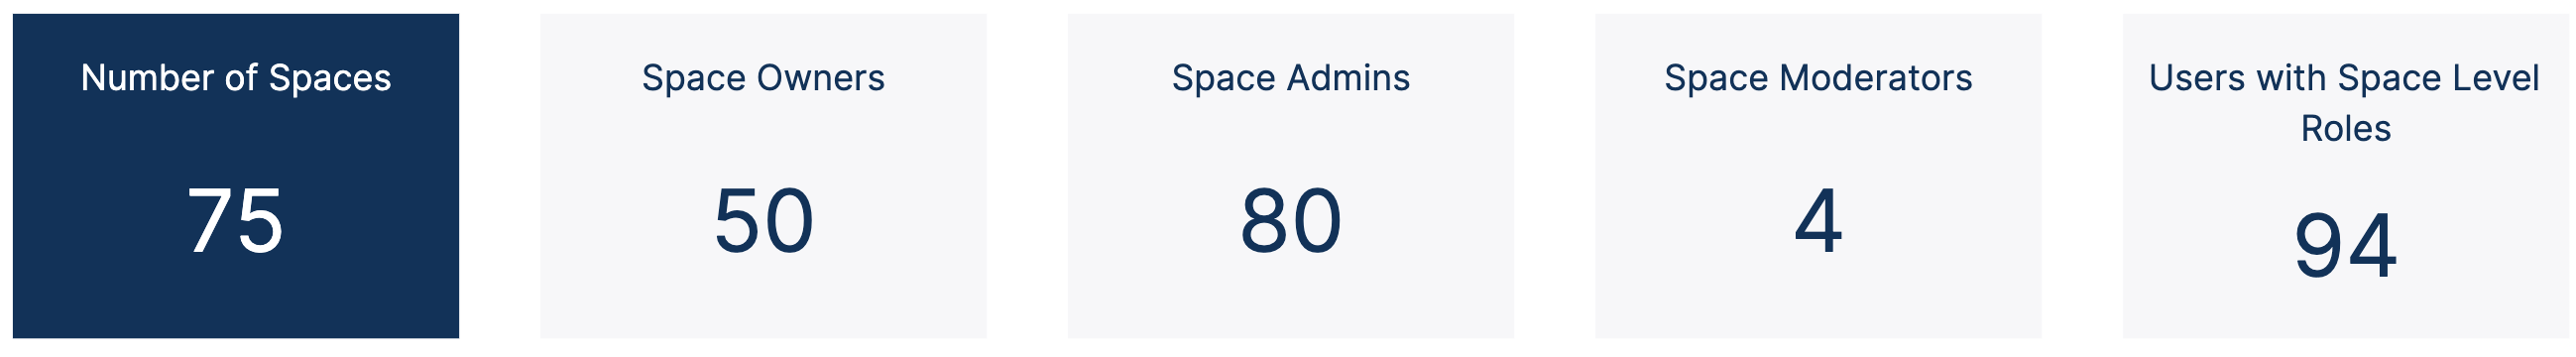 G-Space_Count.png